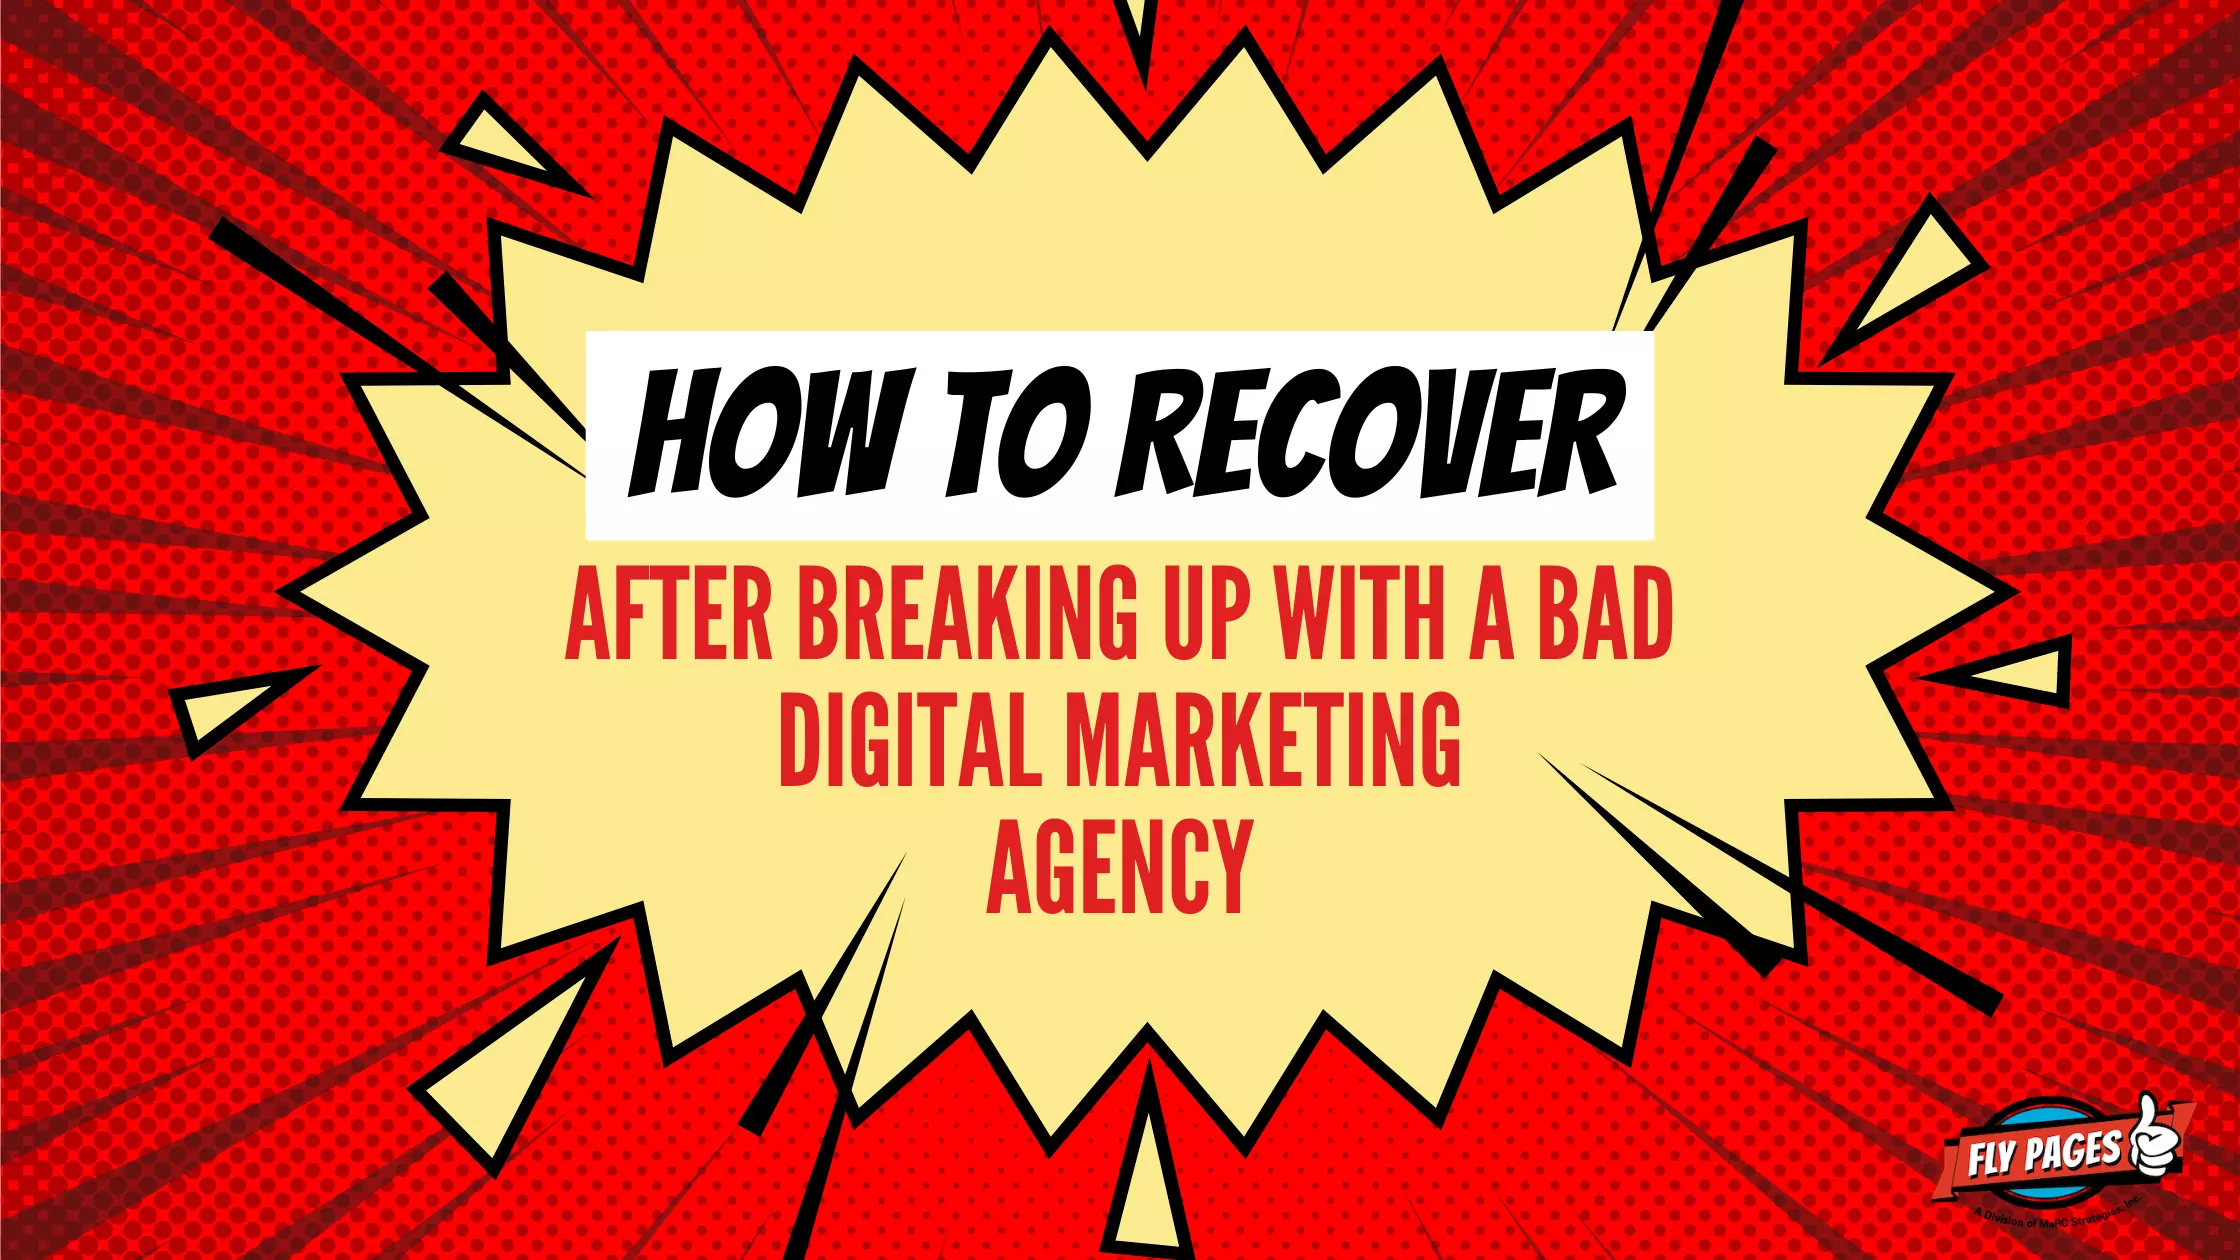 How to recover after breaking up with a bad digital marketing agency